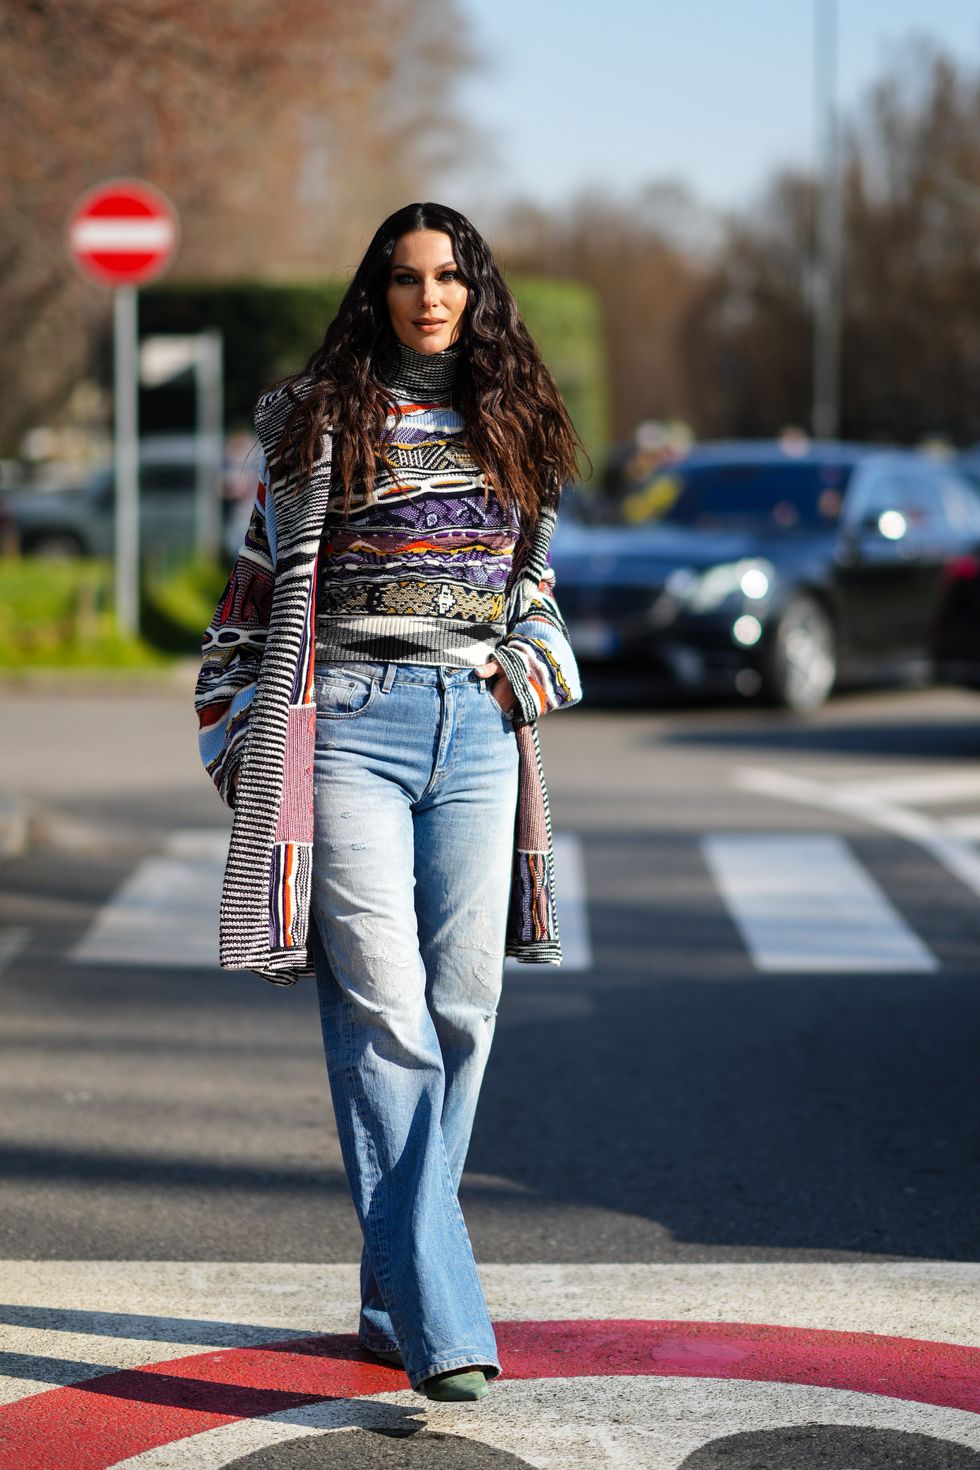 milan, italy   february 25 paola turani wears a gray  orange  purple  blue print pattern turtleneck pullover, a matching a gray  orange  purple  blue print pattern long wool cardigan, high waist blue faded flared denim jeans pants, green suede pointed pumps heels shoes, outside the missoni fashion show, during the milan fashion week fallwinter 20222023 on february 25, 2022 in milan, italy photo by edward berthelotgetty images